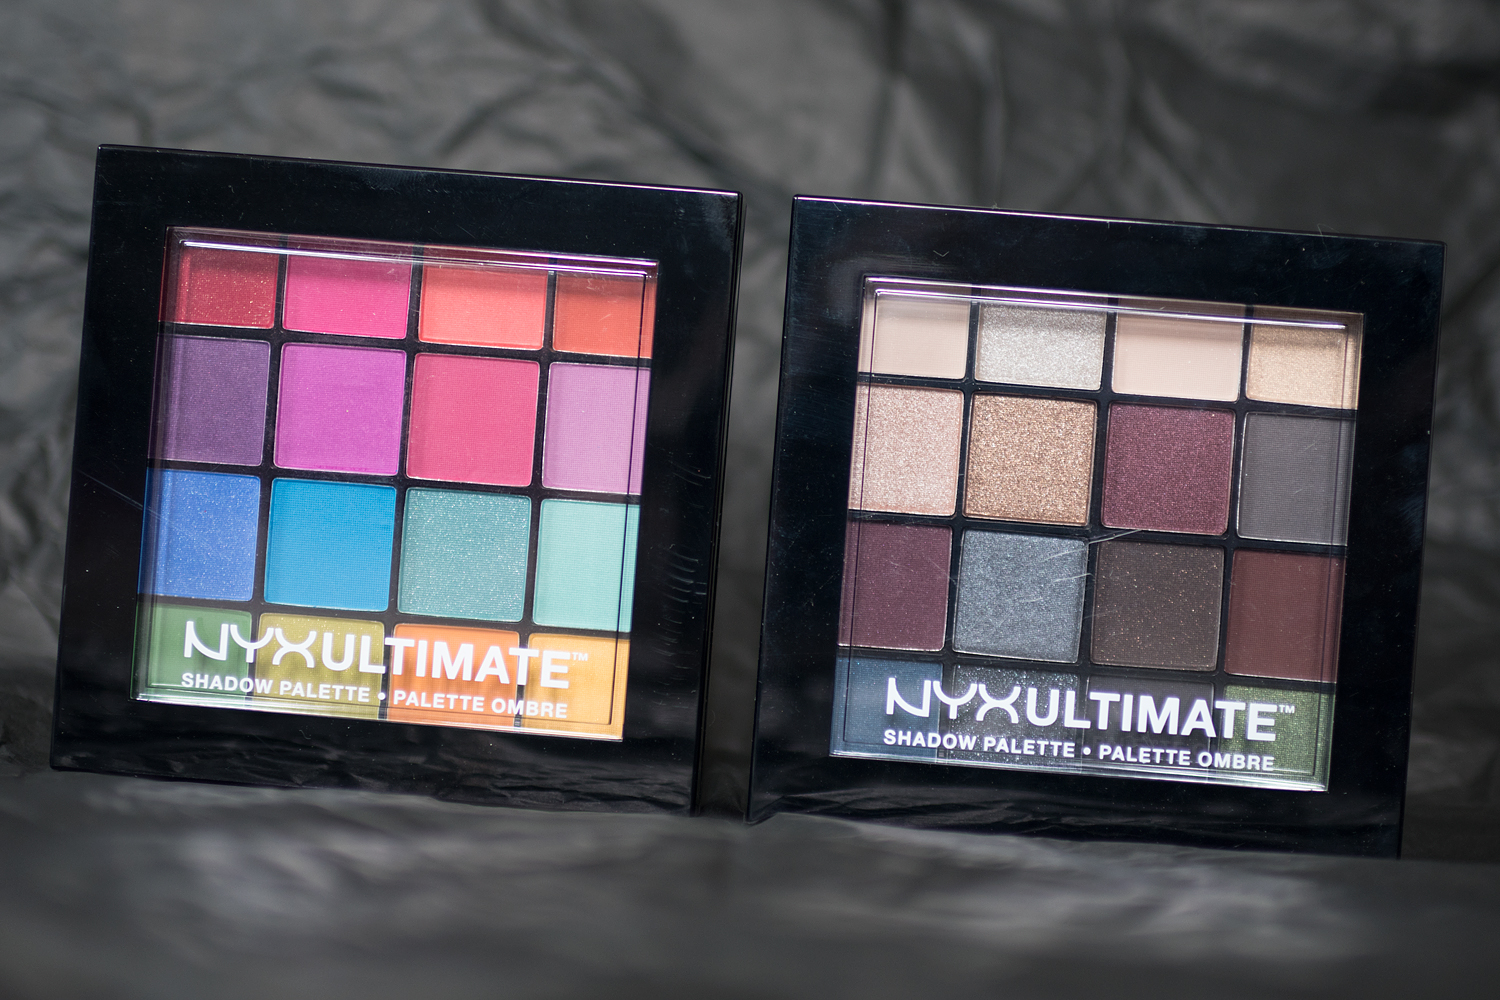 nyx the halo look Ultimate Shadow Palette Pro Lip Cream Palette